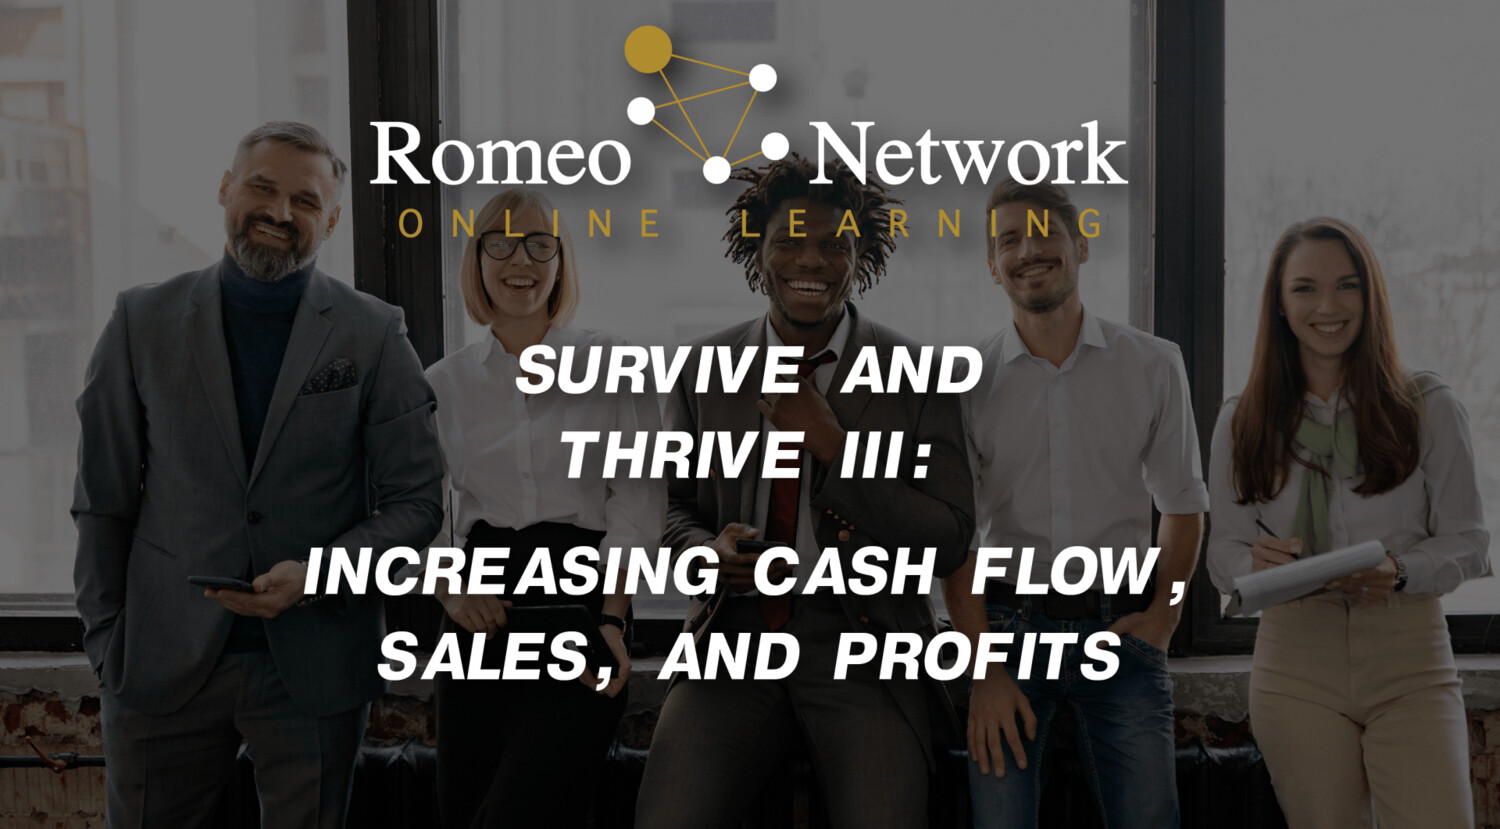 Survive and Thrive III: Increasing Cash Flow, Sales, and Profits